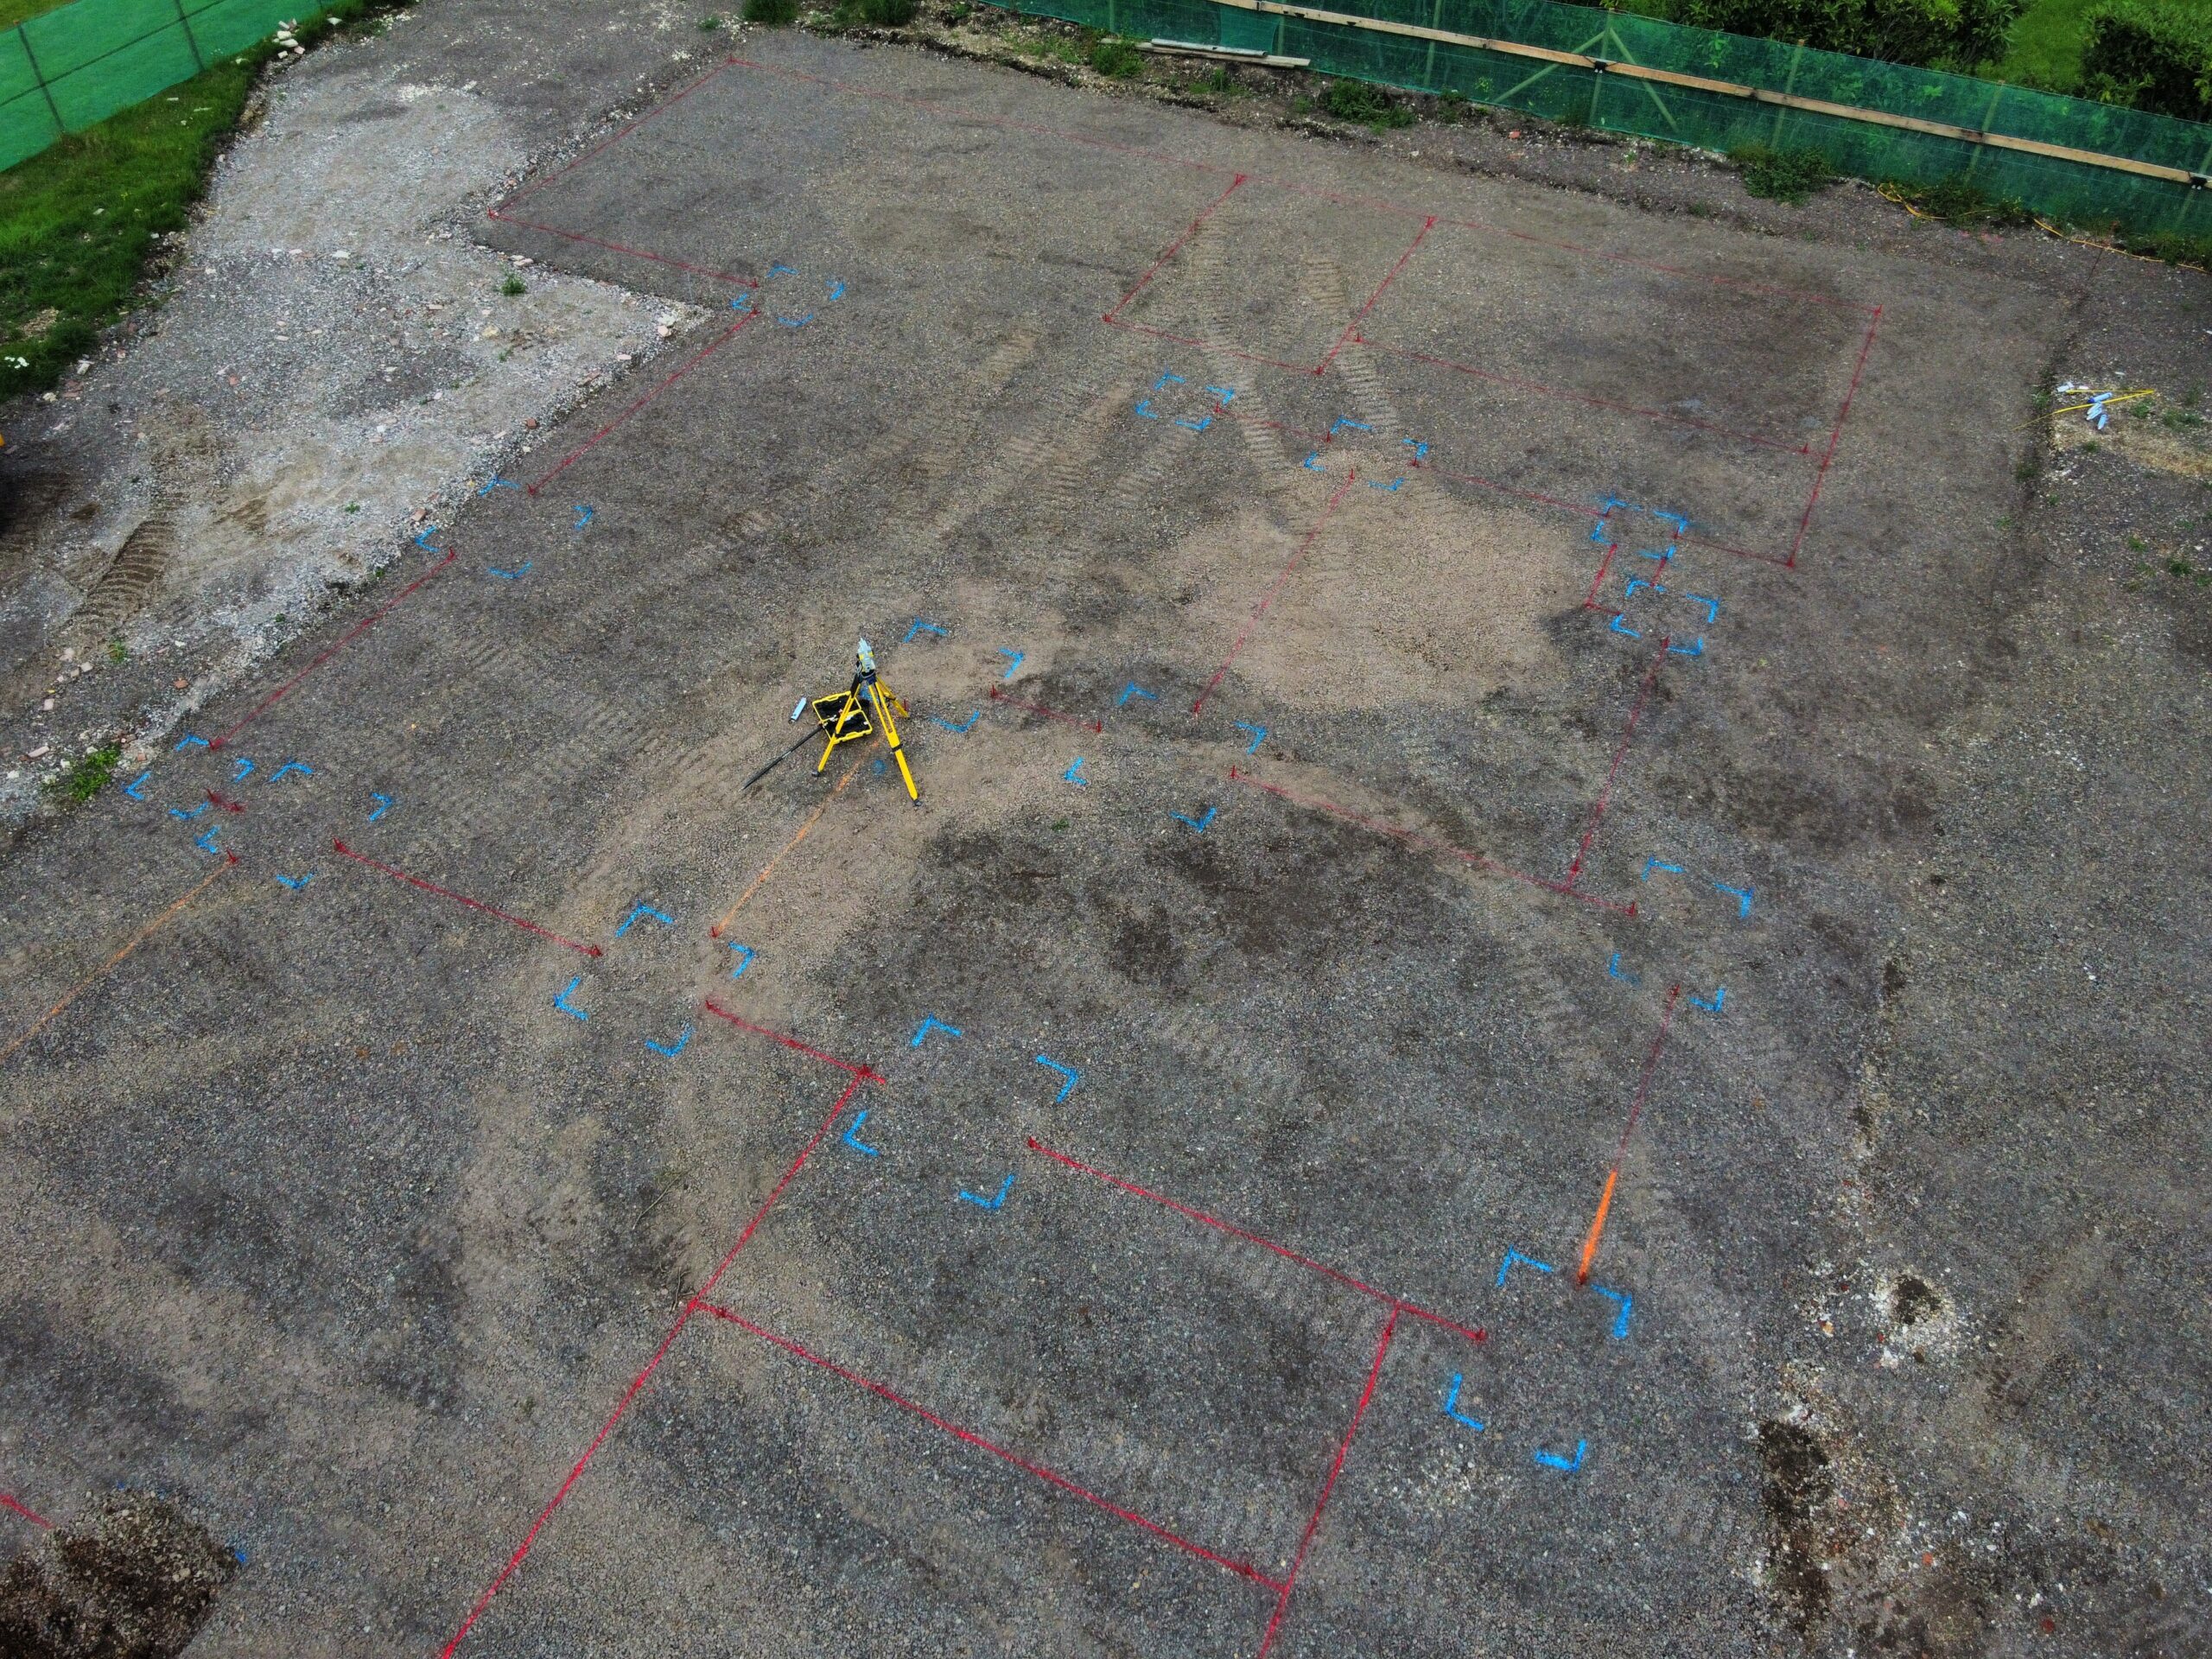 Aeiral photograph showing foundation's for a building marked ready for excavation, with a Surveying Total Station visible